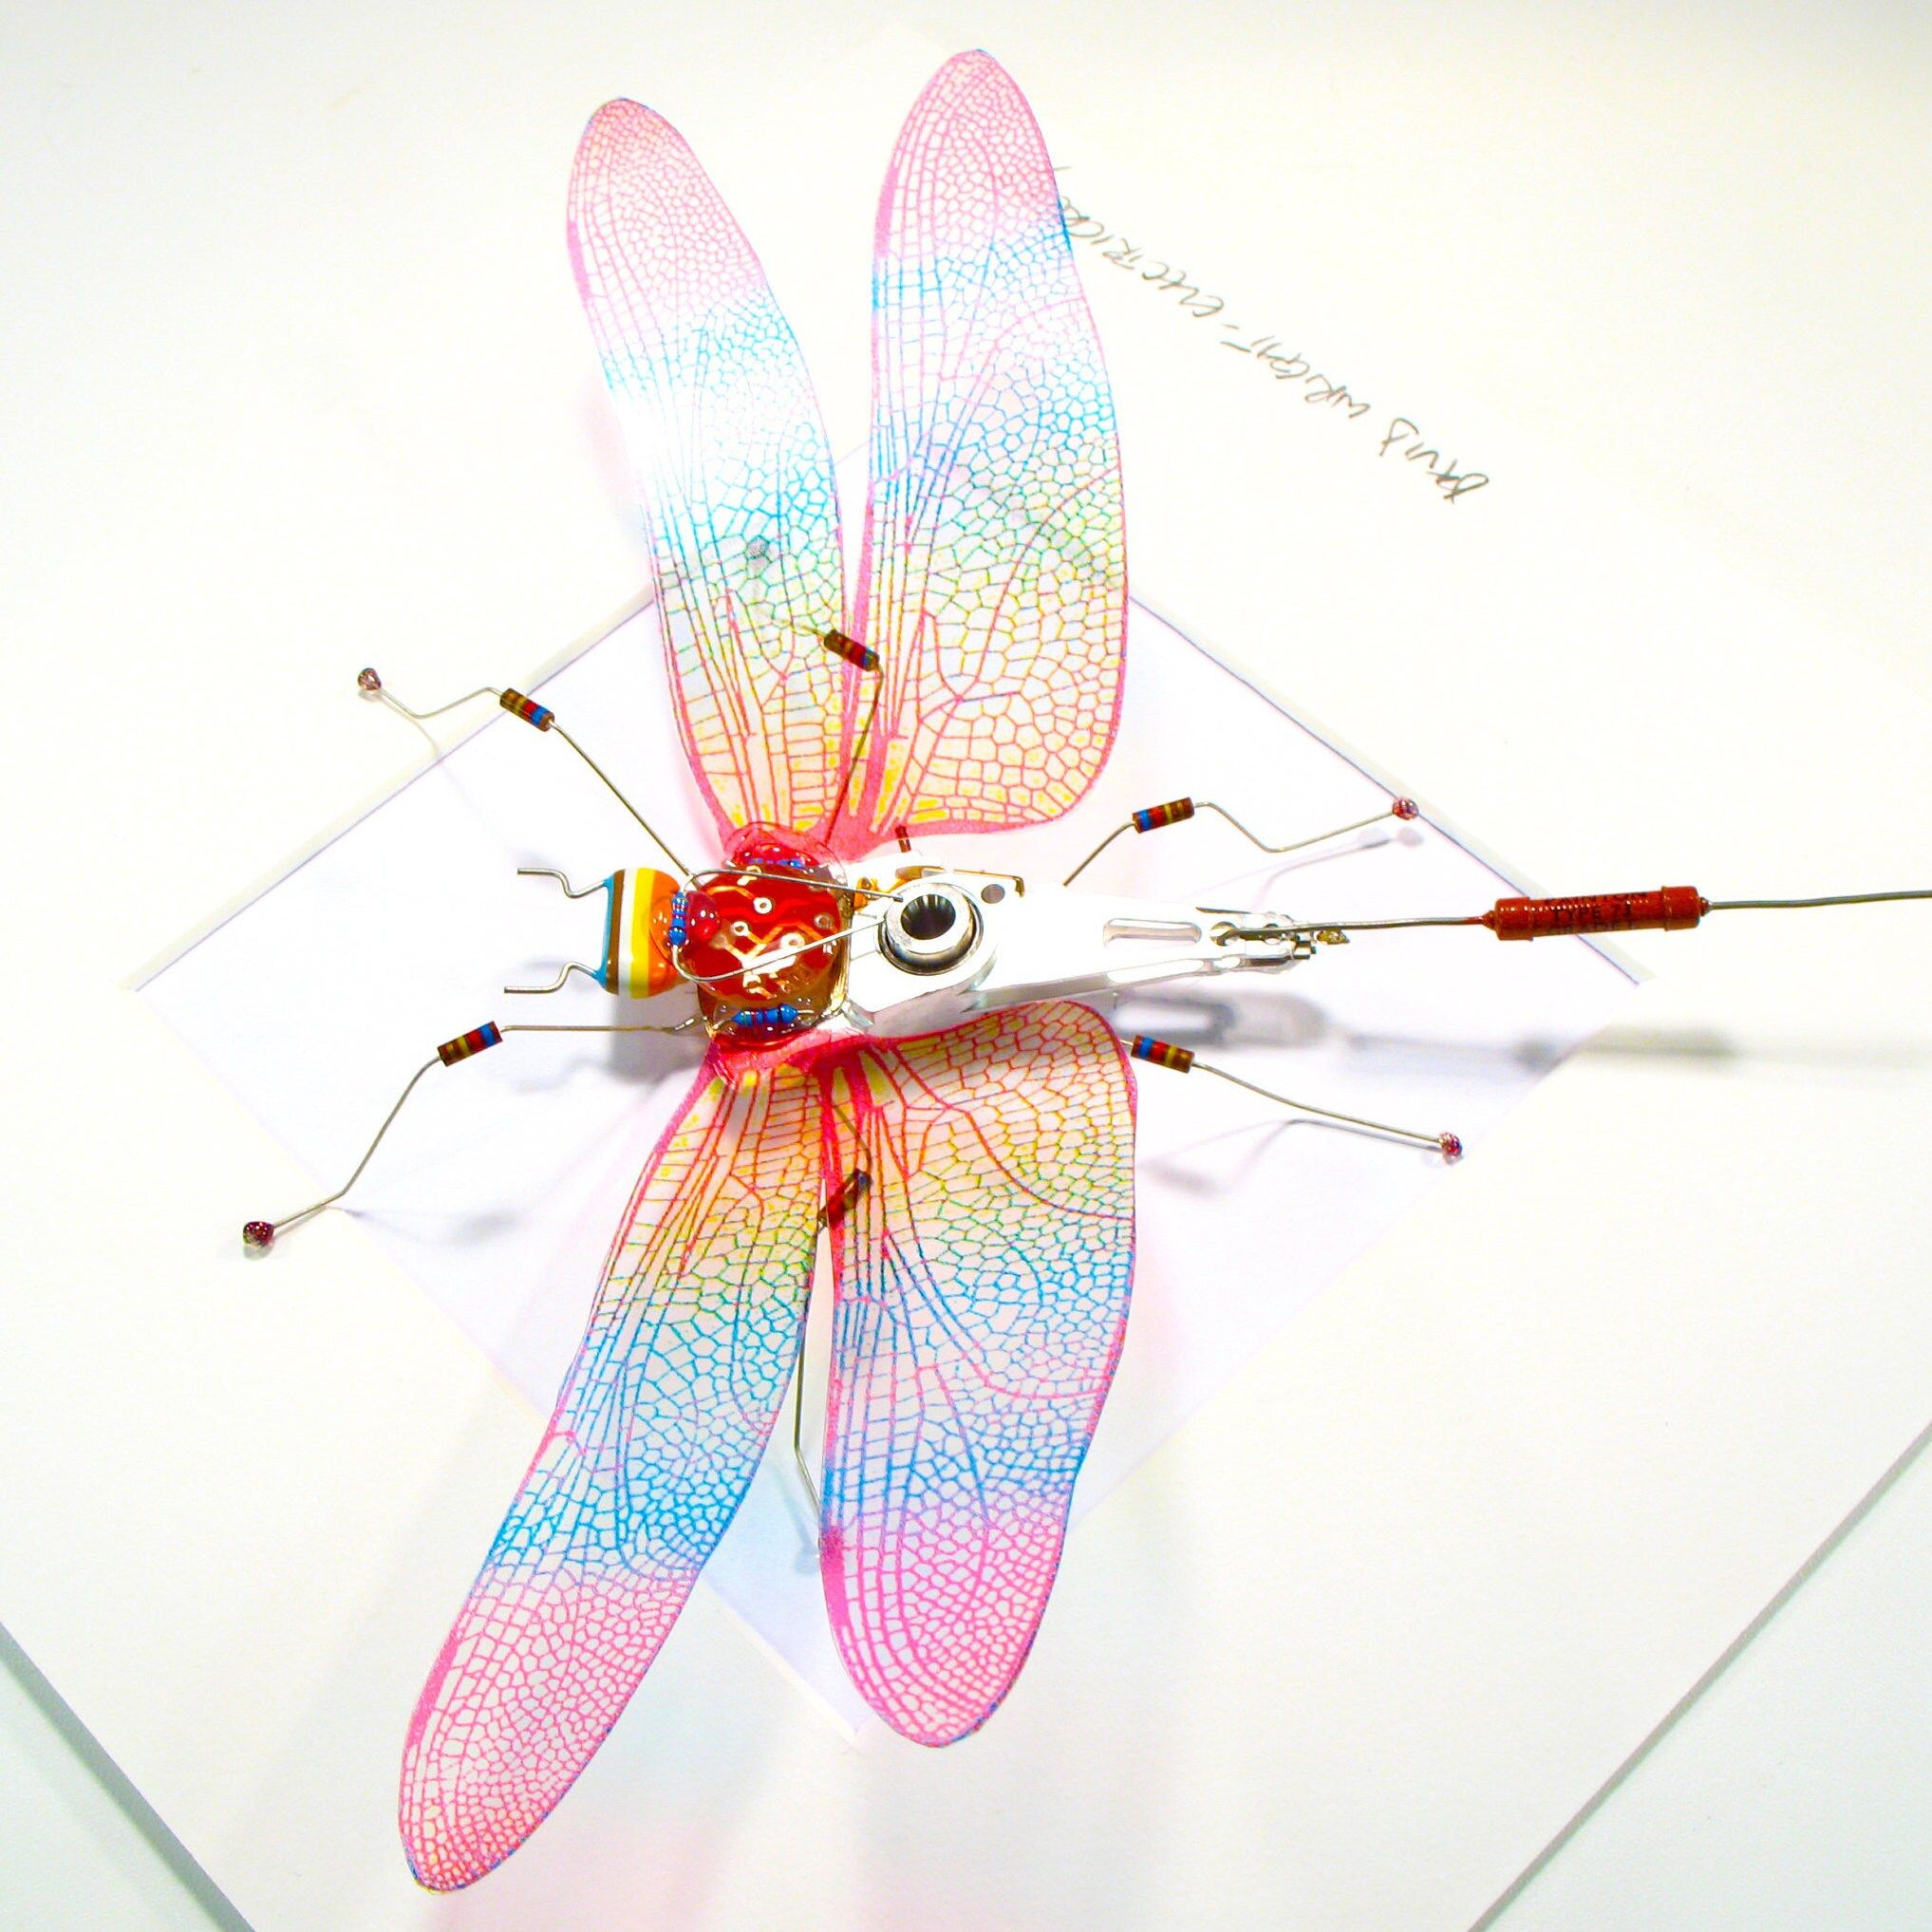 Rainbow Wing Dragonfly Framed Wall Art | Recycled Sculpture Throughout Best And Newest Dragonflies Wall Art (View 13 of 20)